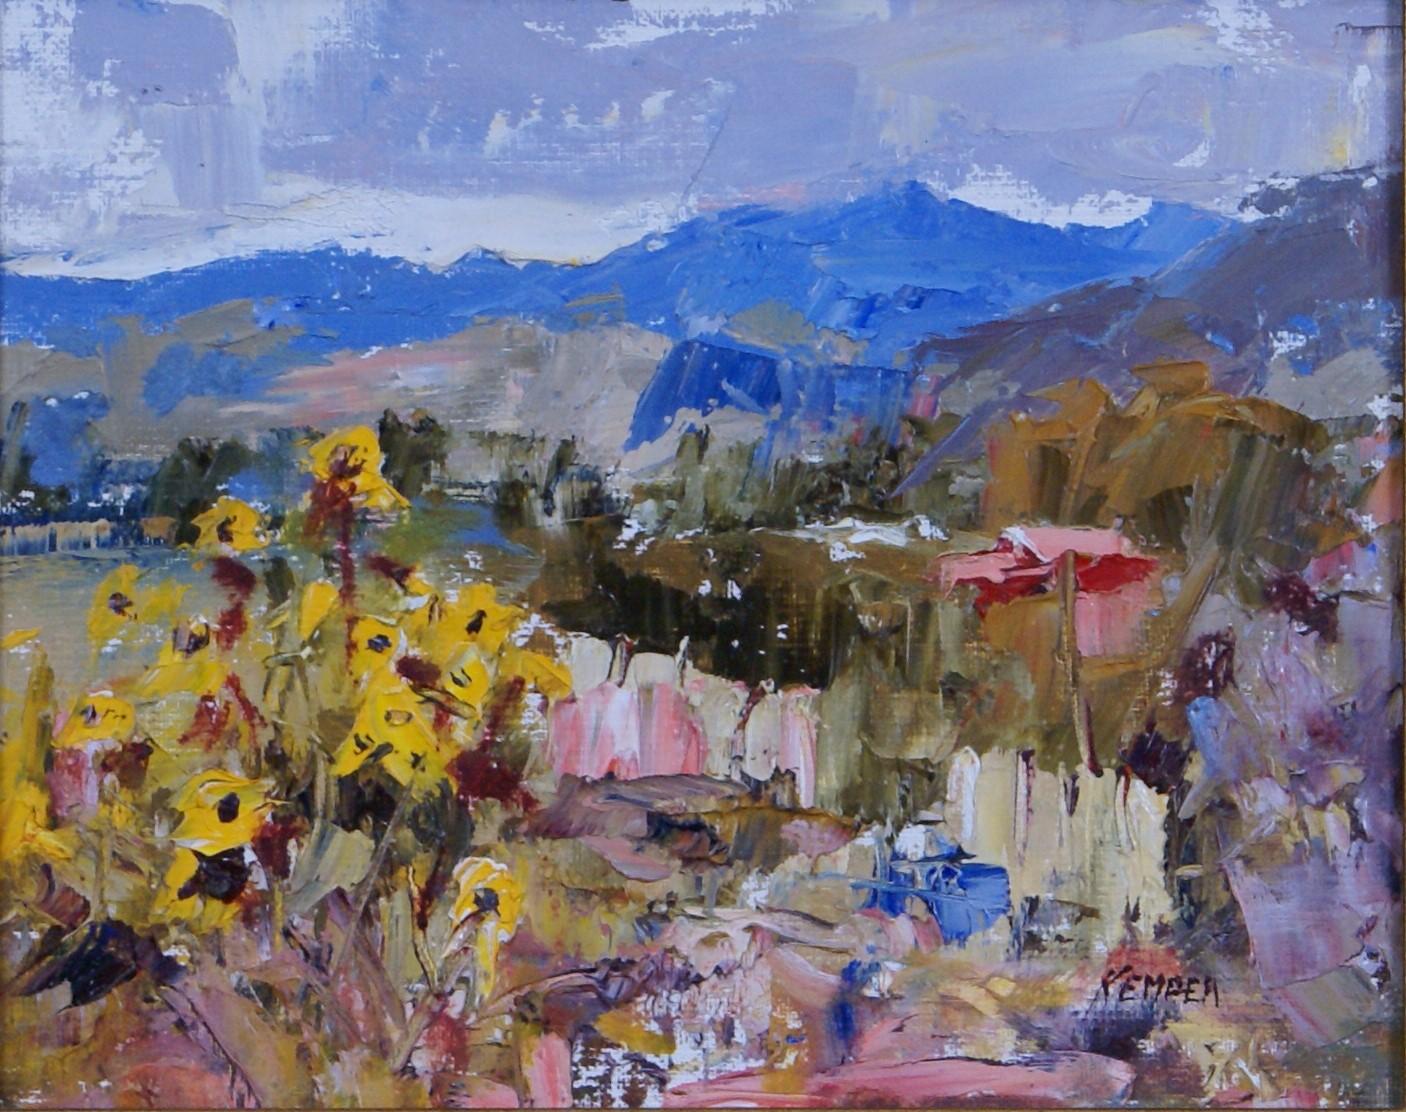 Textures of Llano Quemado - Painting by Kemper Coley